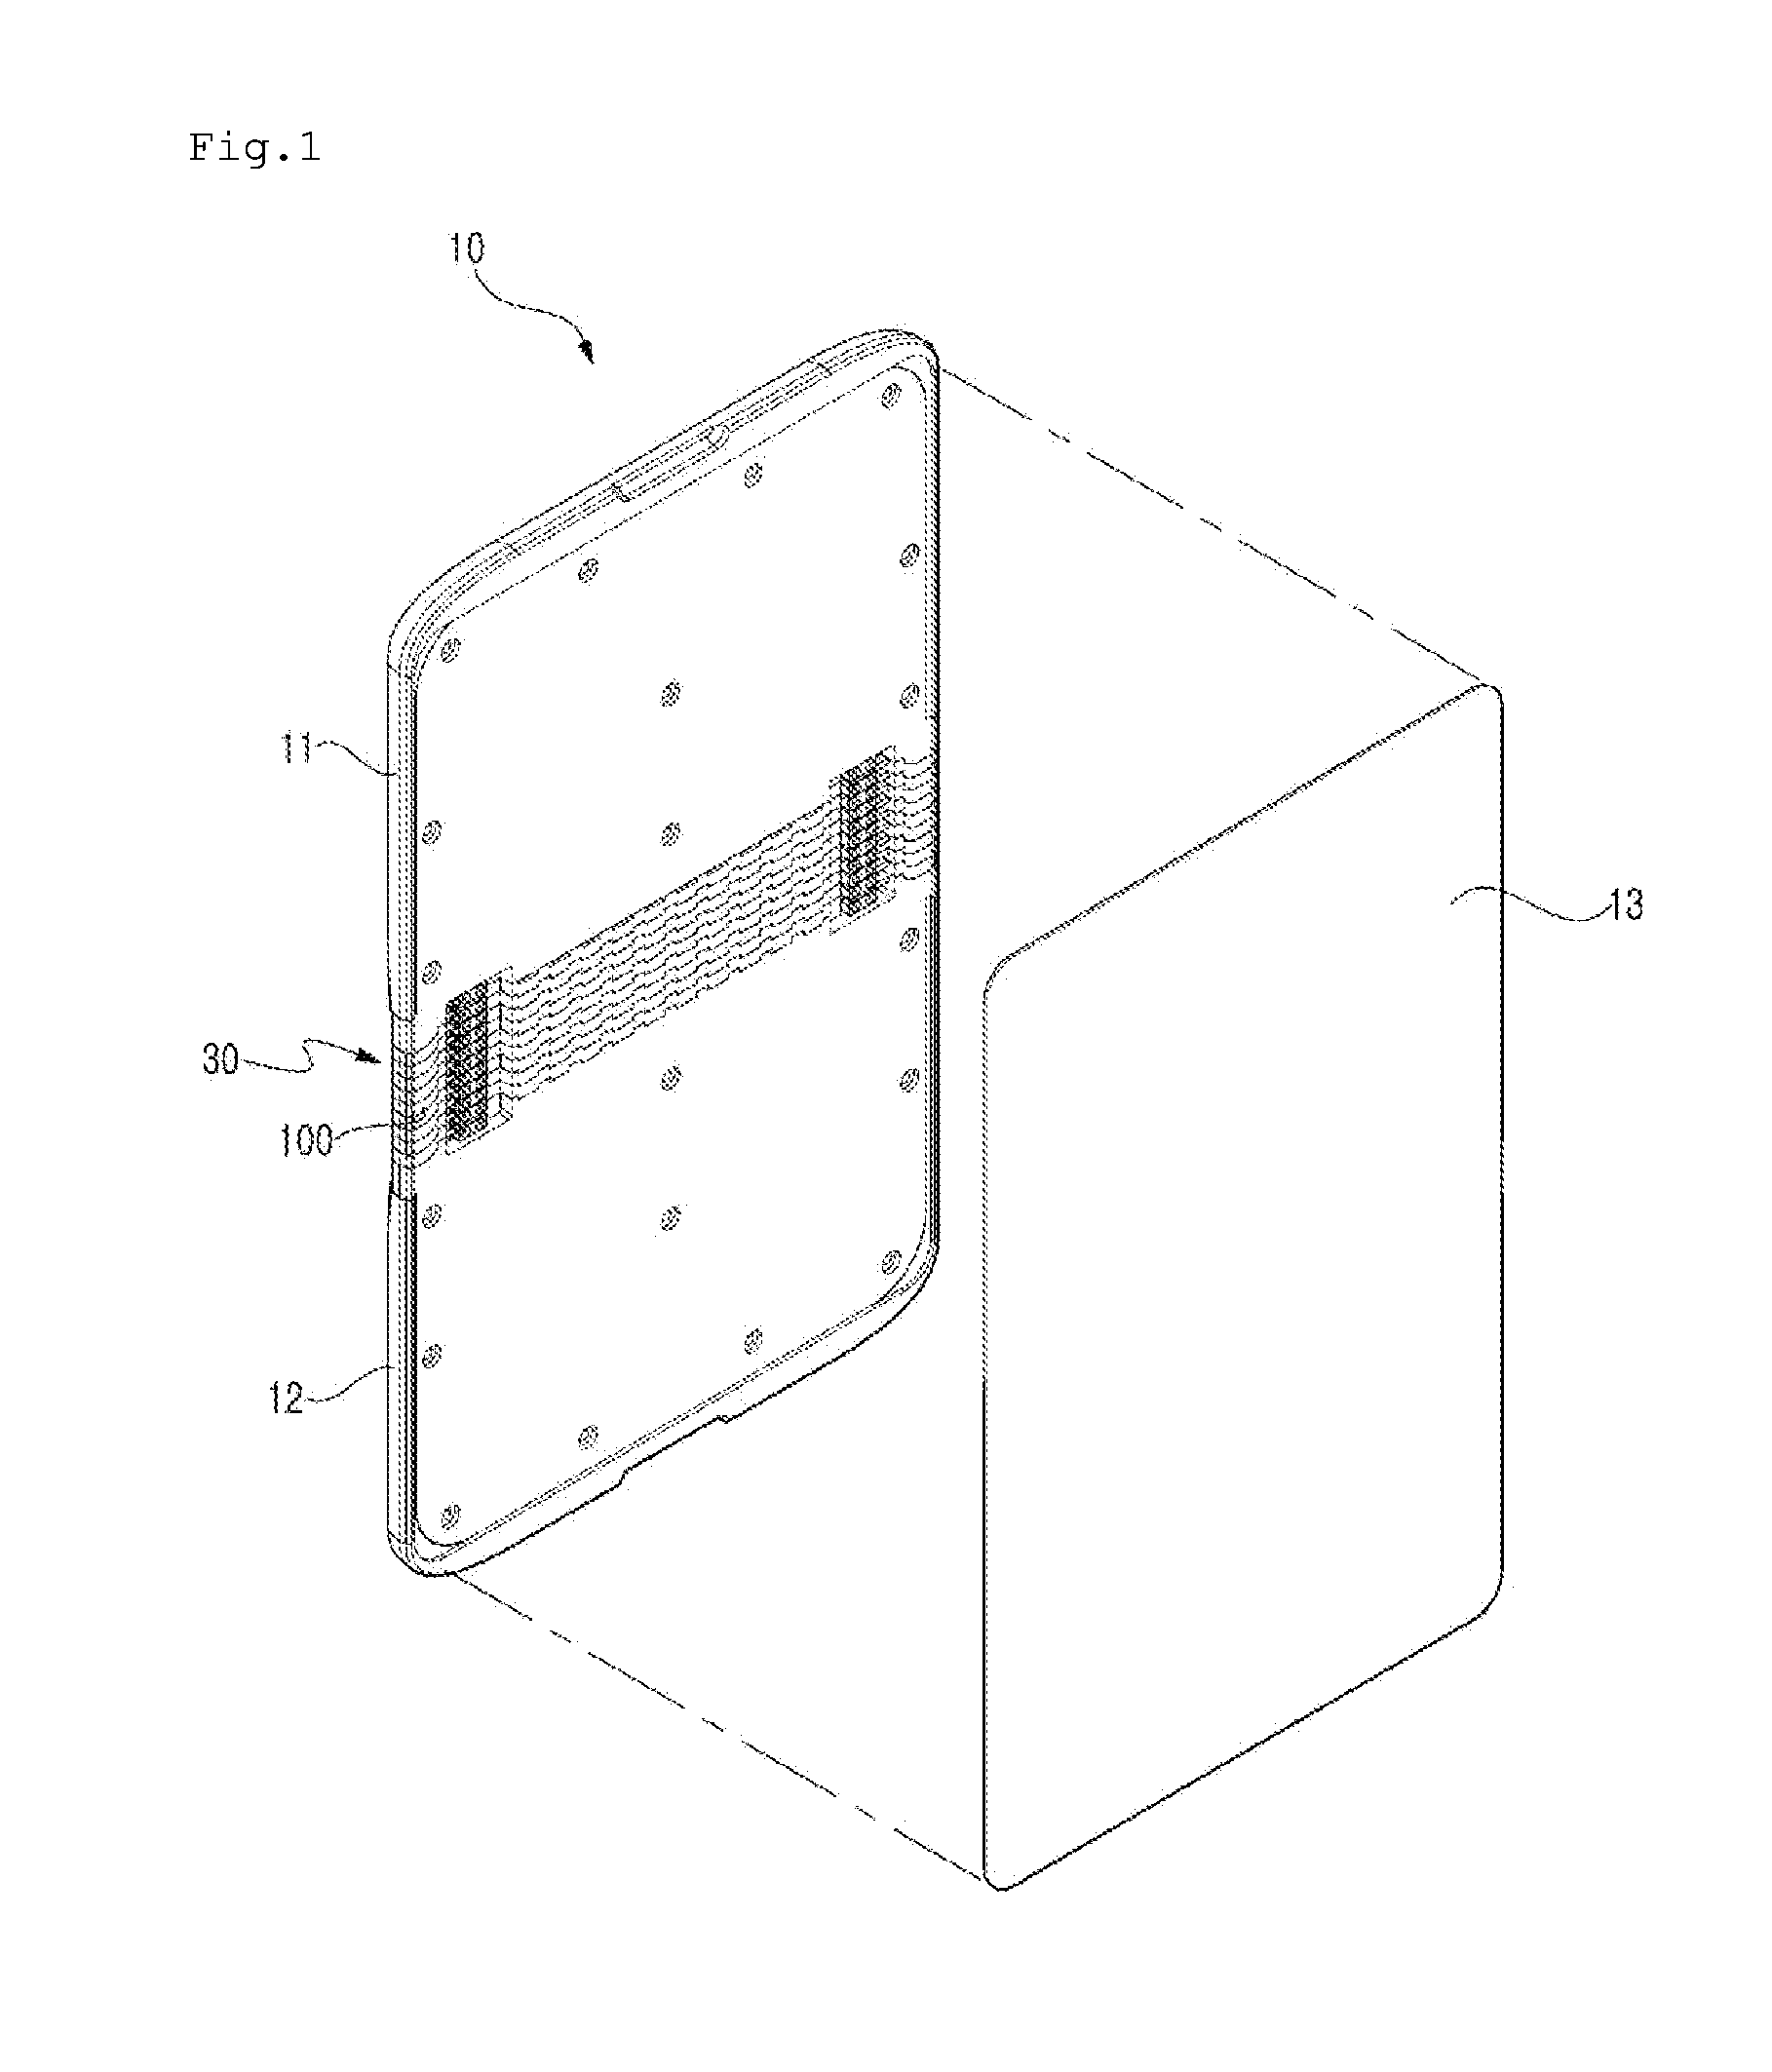 Flexible hinge device having cooperative operating structure